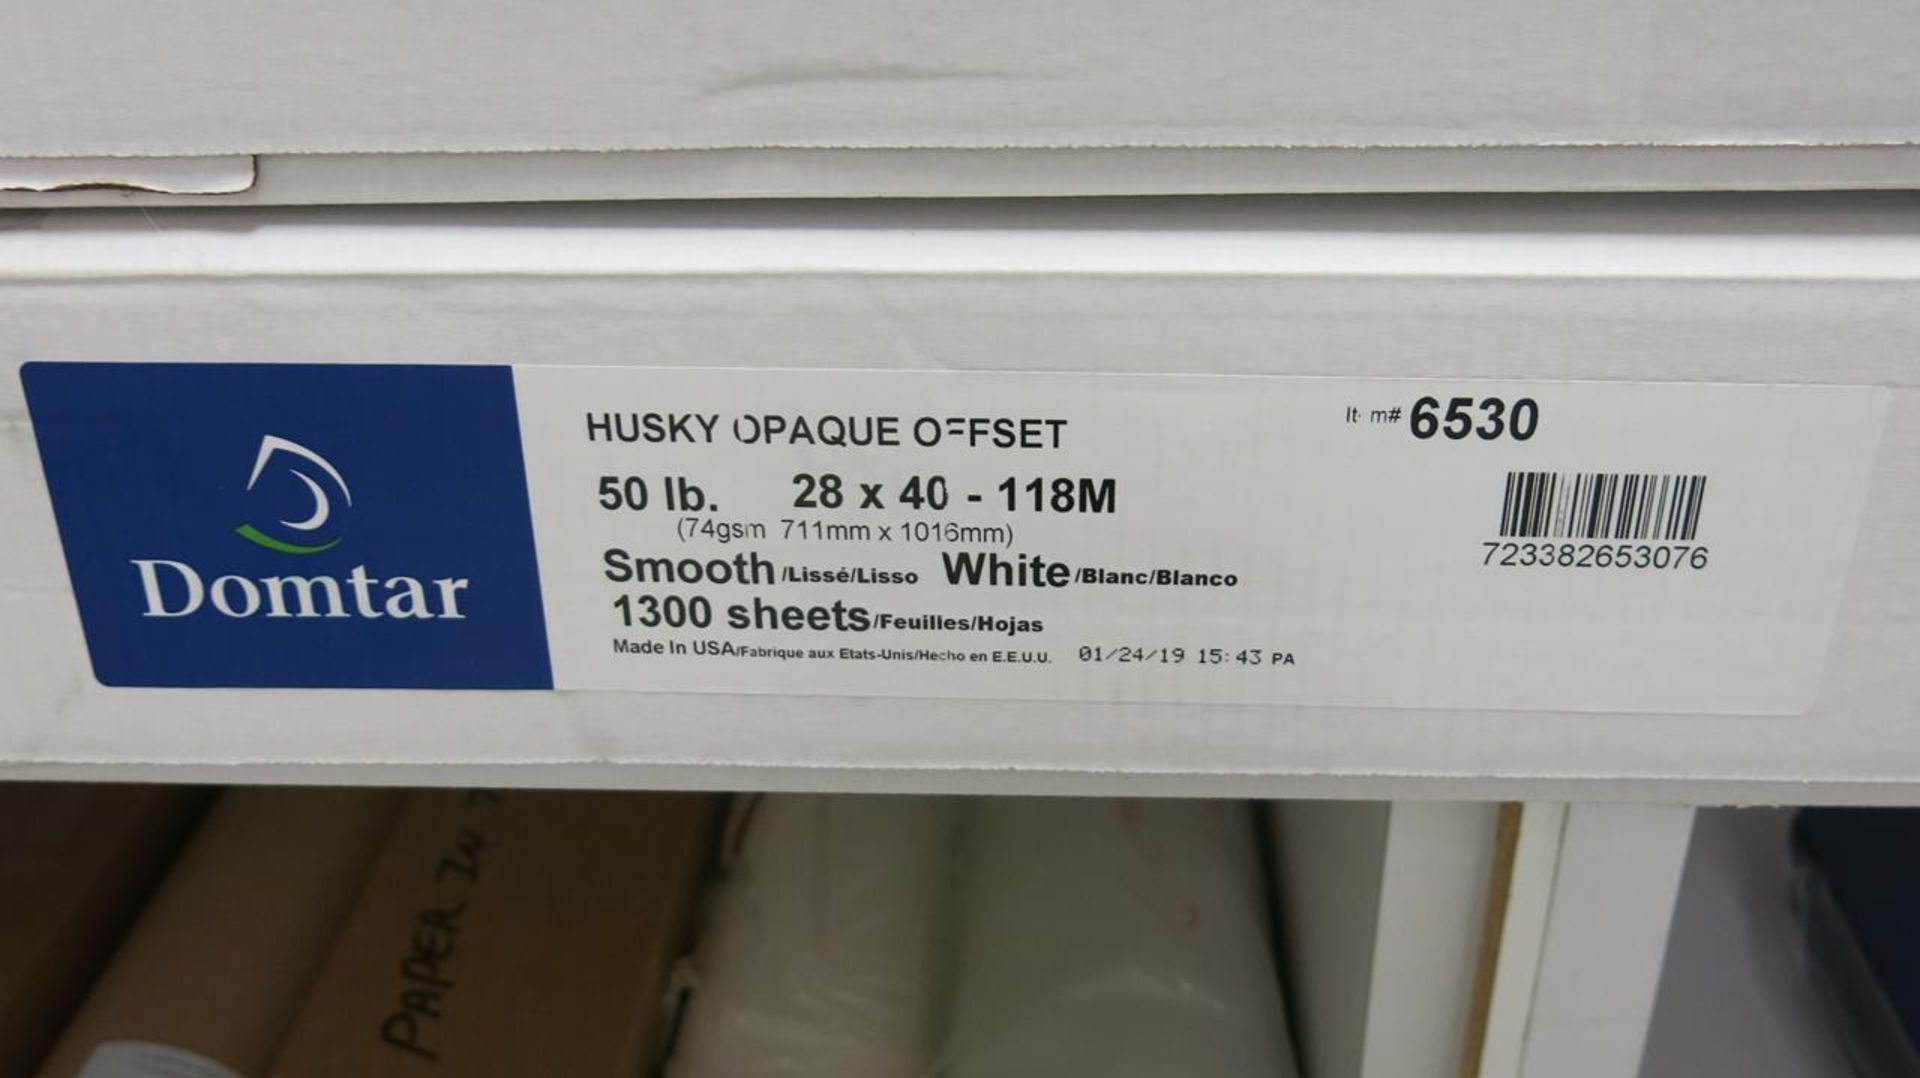 LOT OF DOMTAR, HUSKY, OPAQUE OFFSET, WHITE SHEETS - Image 2 of 2